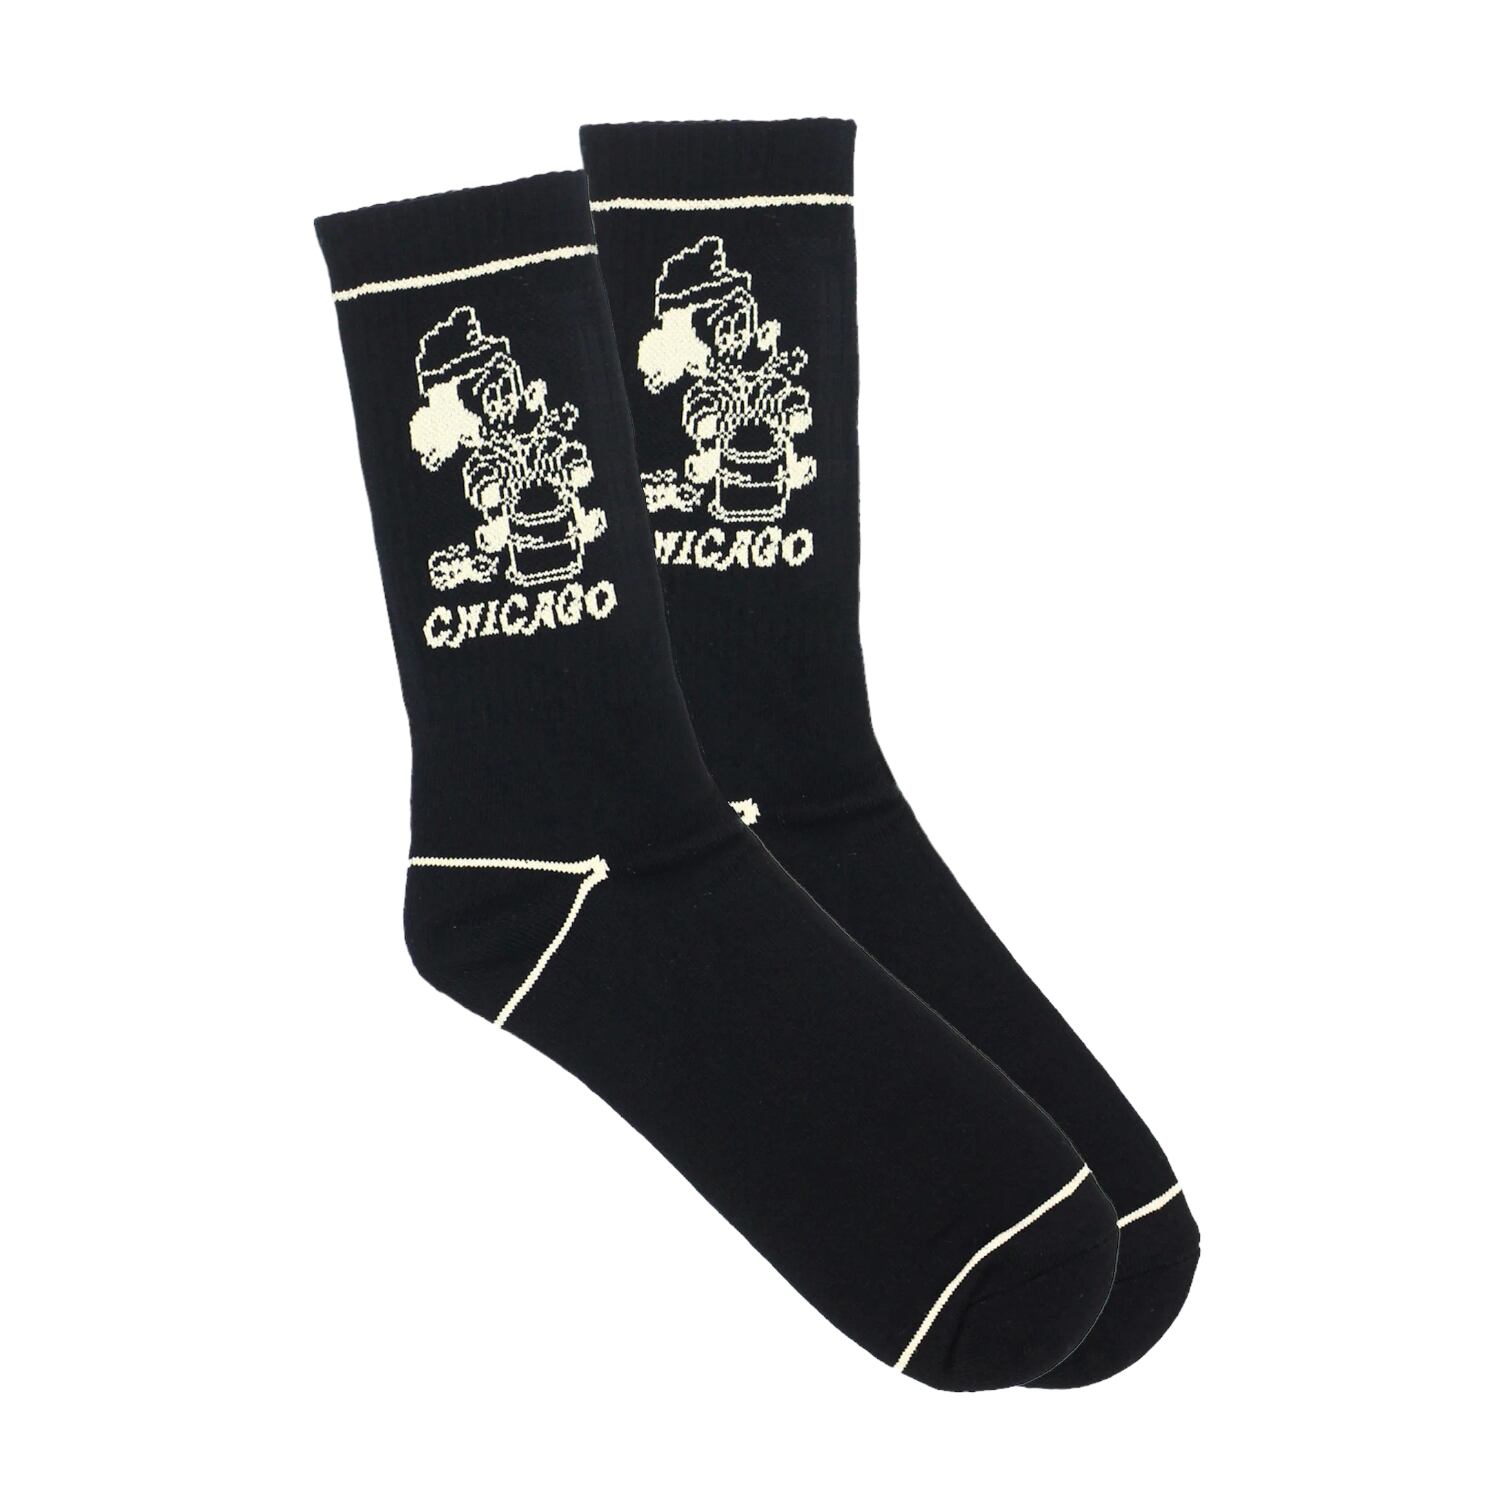 Snack Skateboards【SEEIN THE SIGHTS CHICAGO SOCKS】